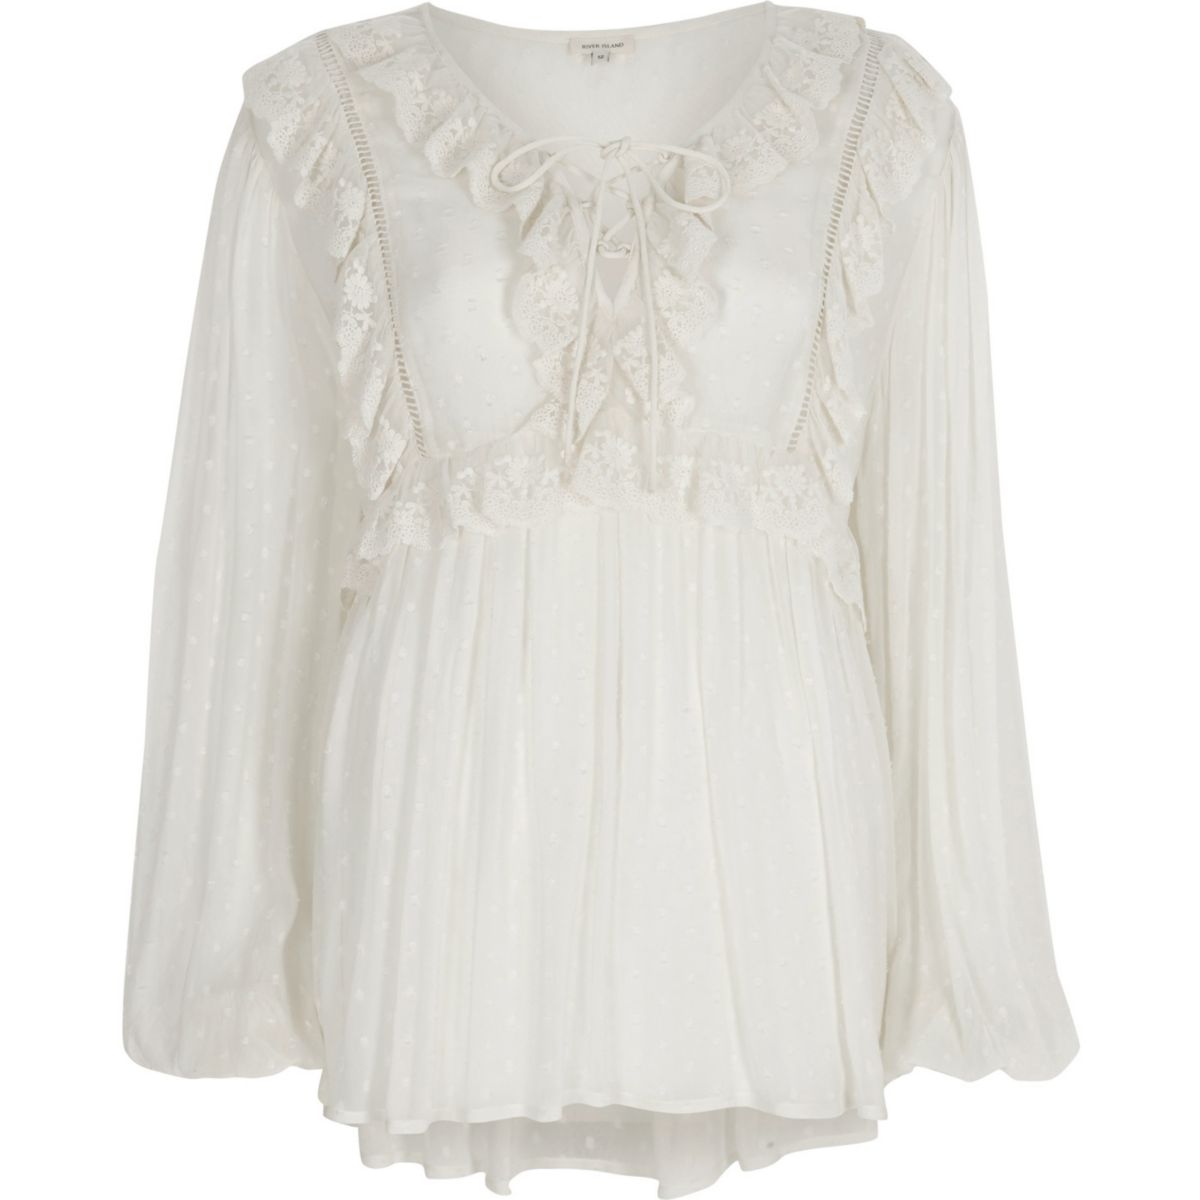 White dobby mesh lace frill top - Tops - Sale - women